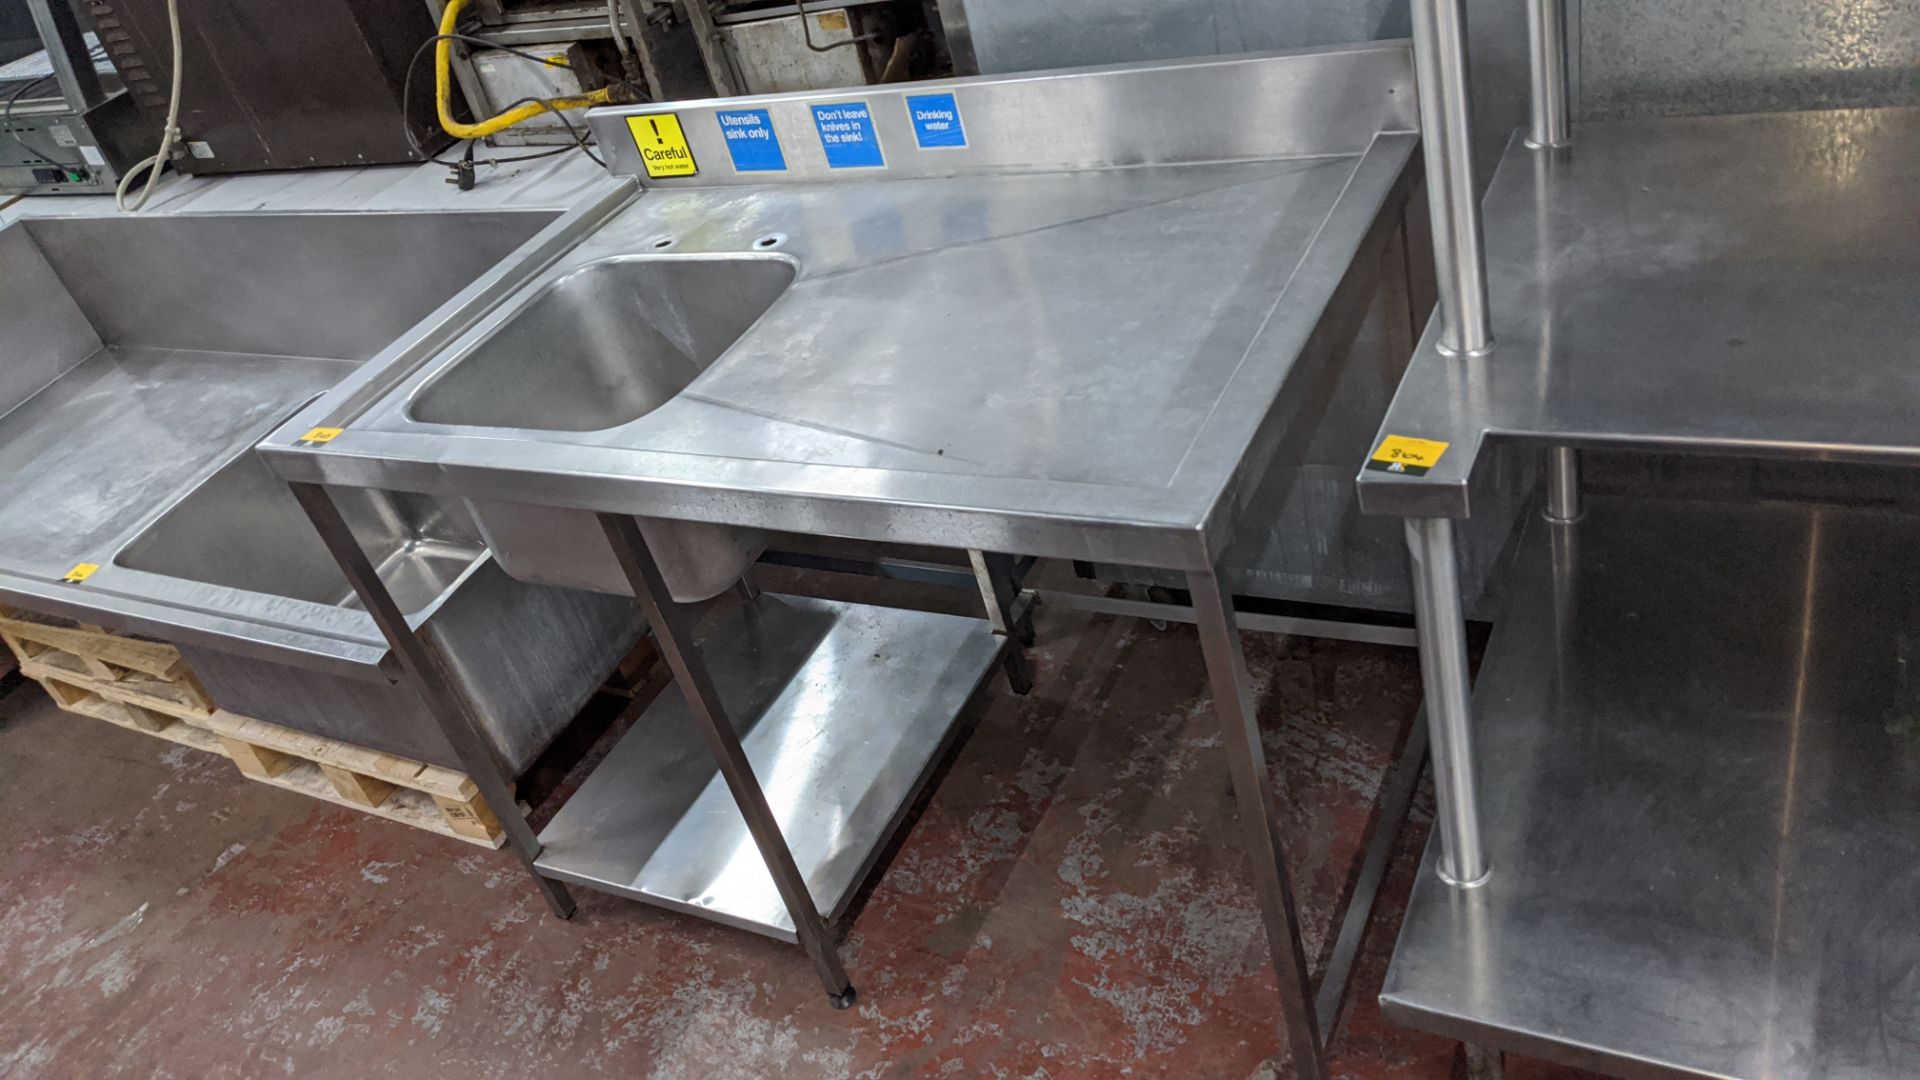 Stainless steel floorstanding single bowl sink with drainer & small shelf below, max dimensions